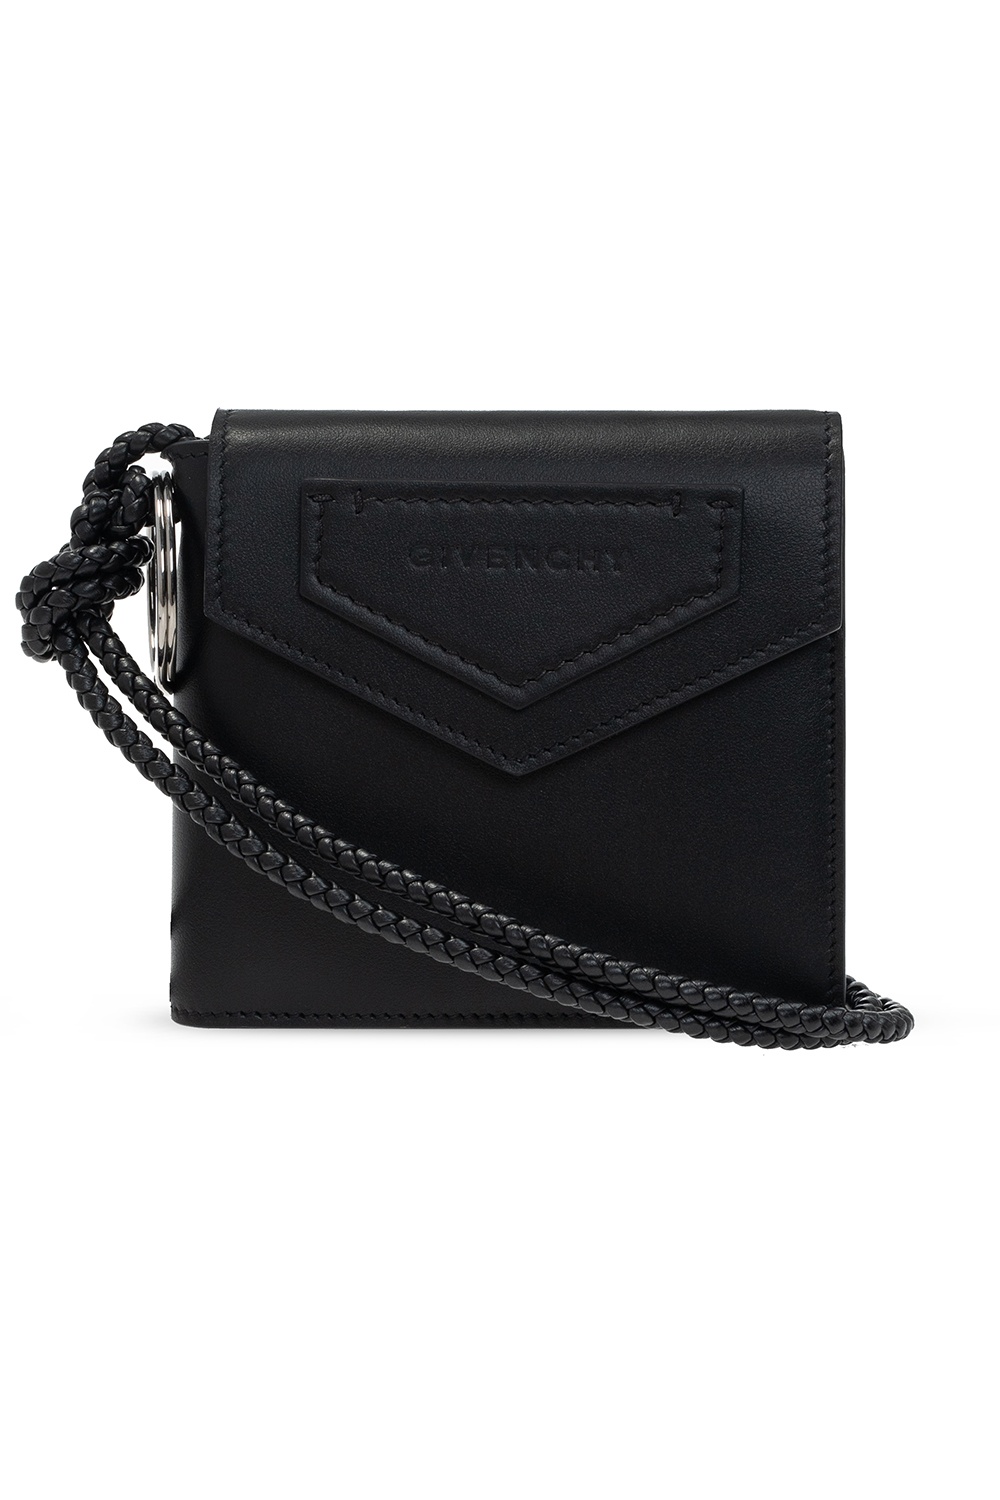 givenchy leather wallet